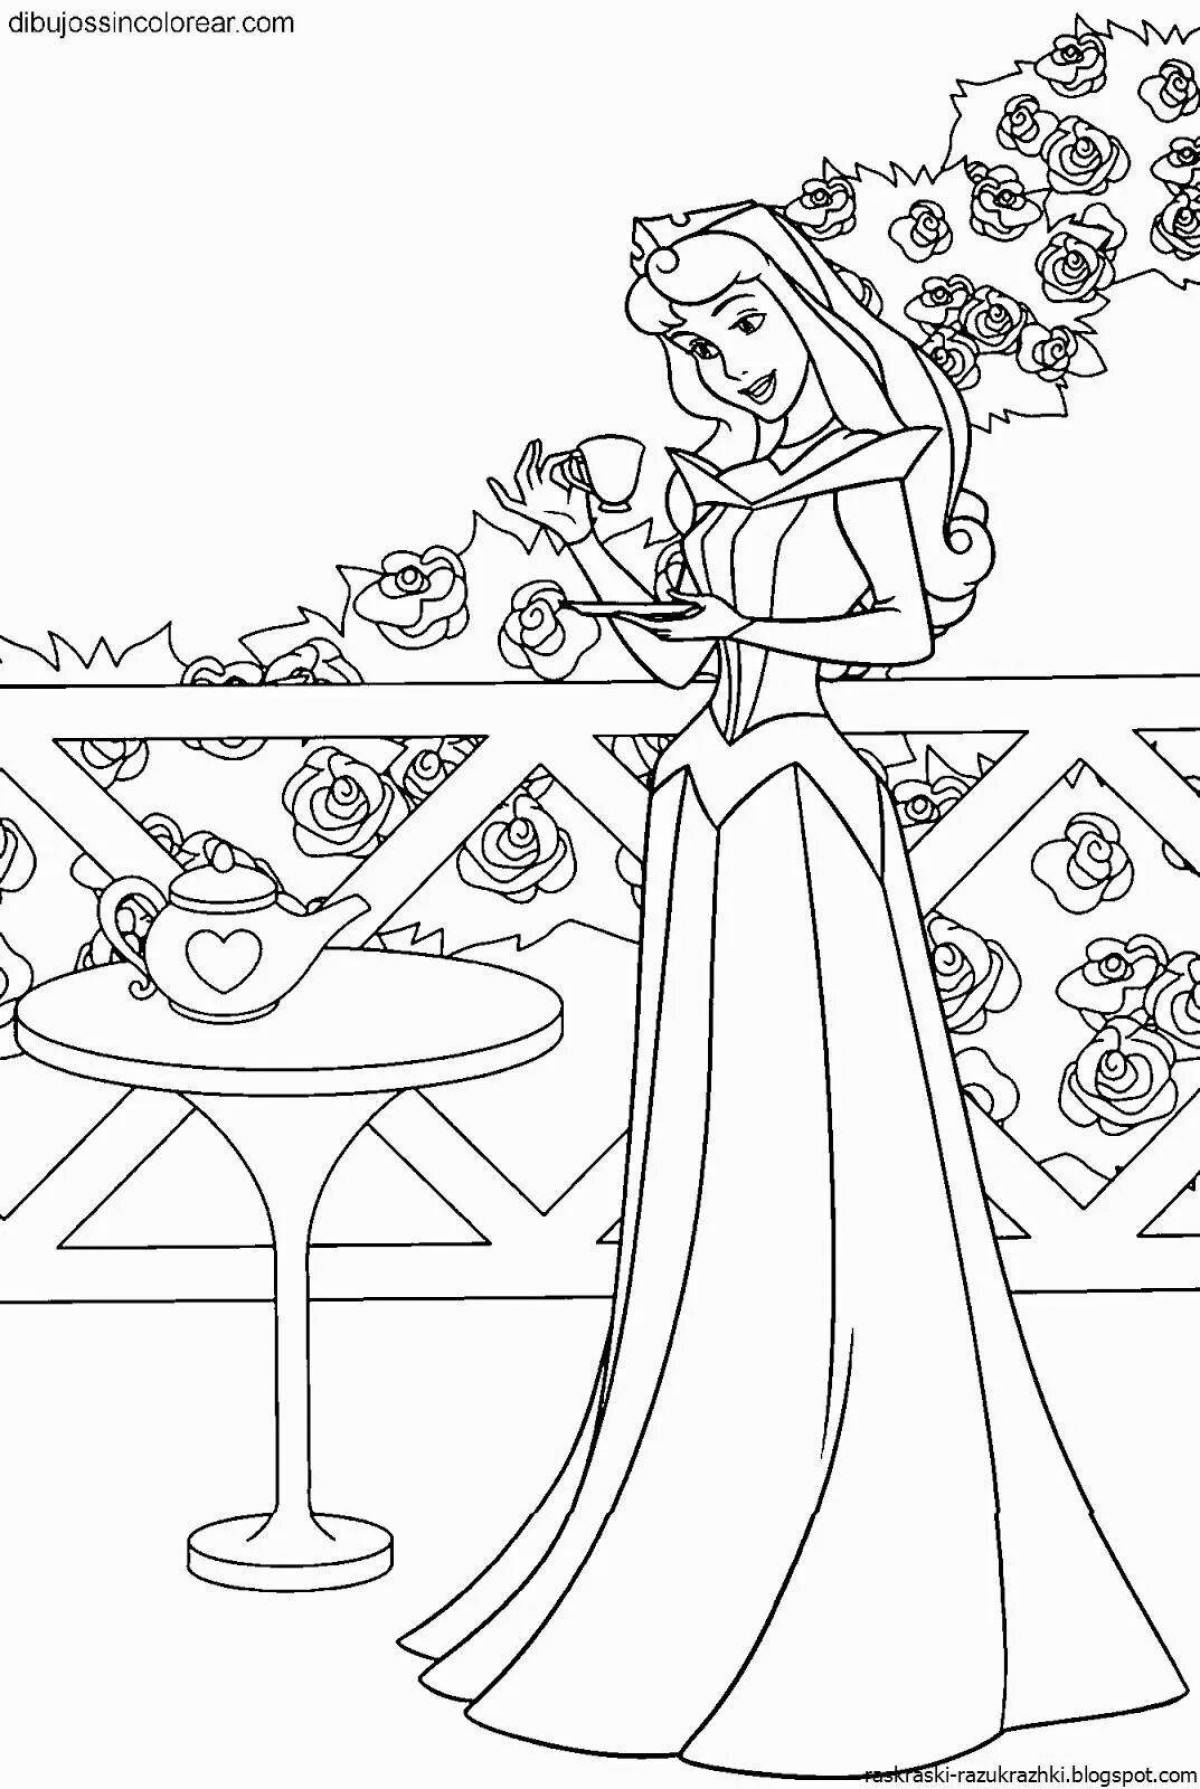 Sparkling aurora coloring book for kids